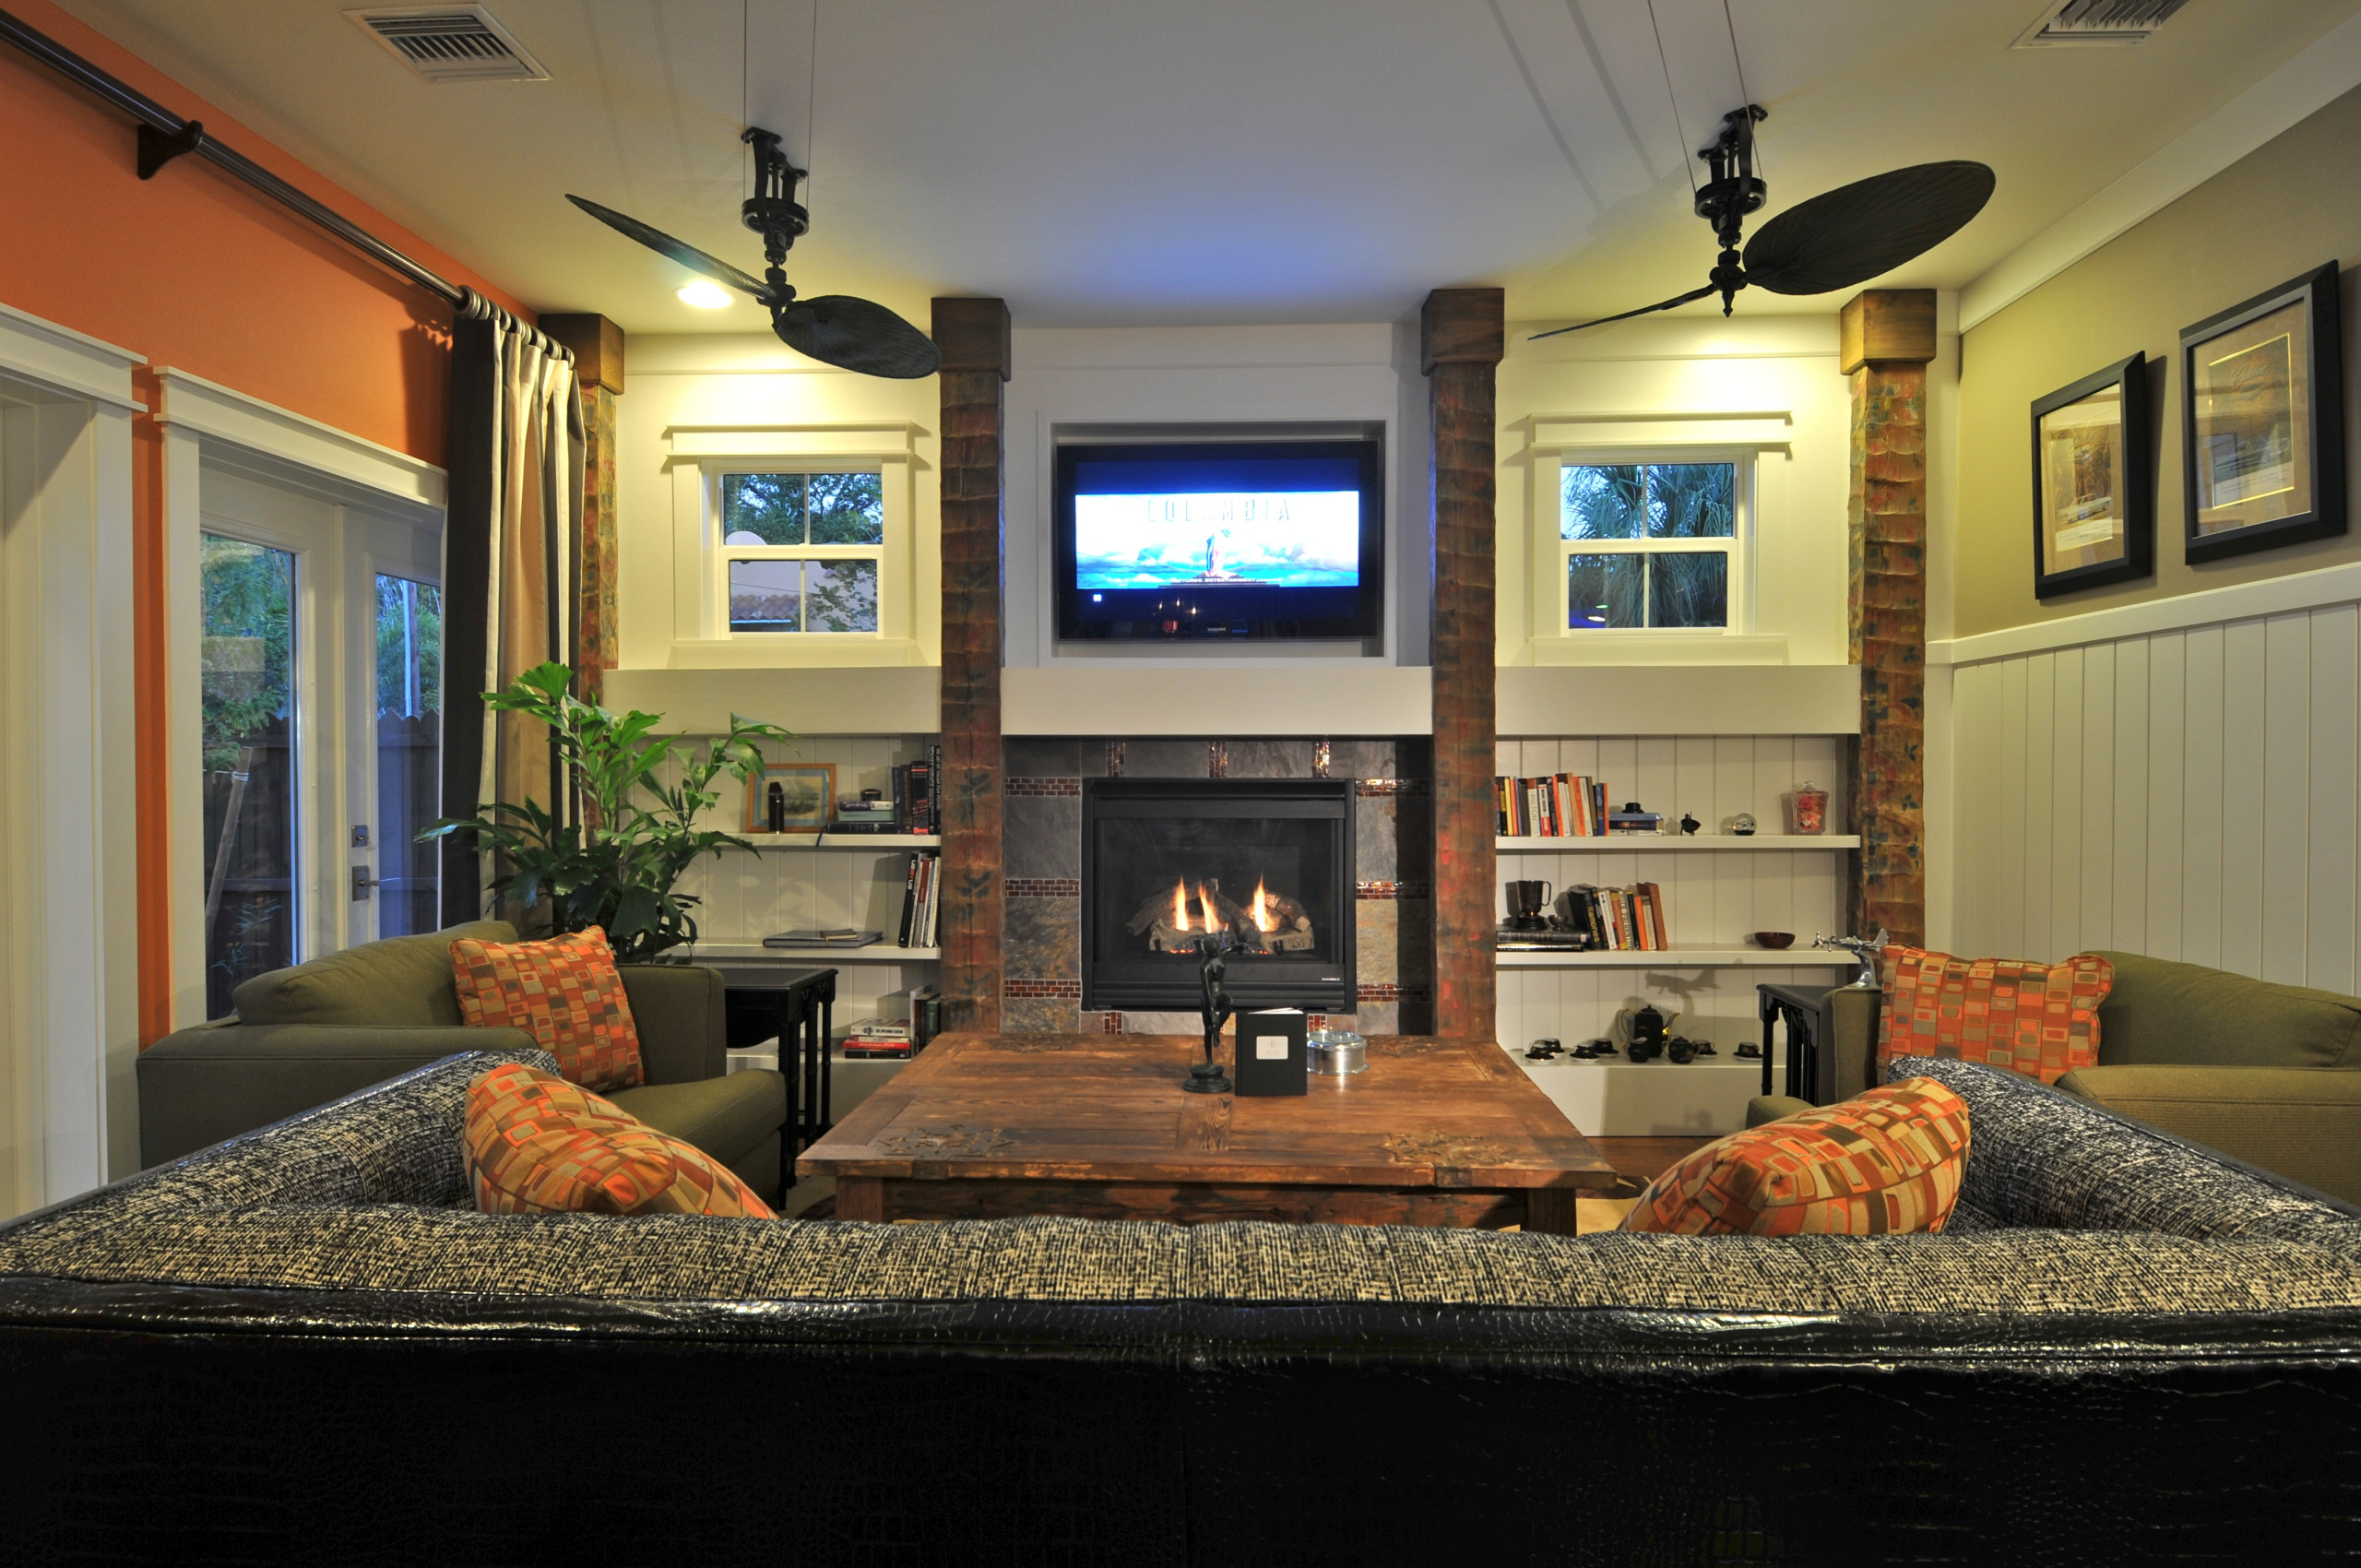 Fireplace columns made from reclaimed hand hewed cypress ceiling beams from the famed Ringling Towers. The vertical wainscot conceals the trap door for the whole house home automation system. Coffee t